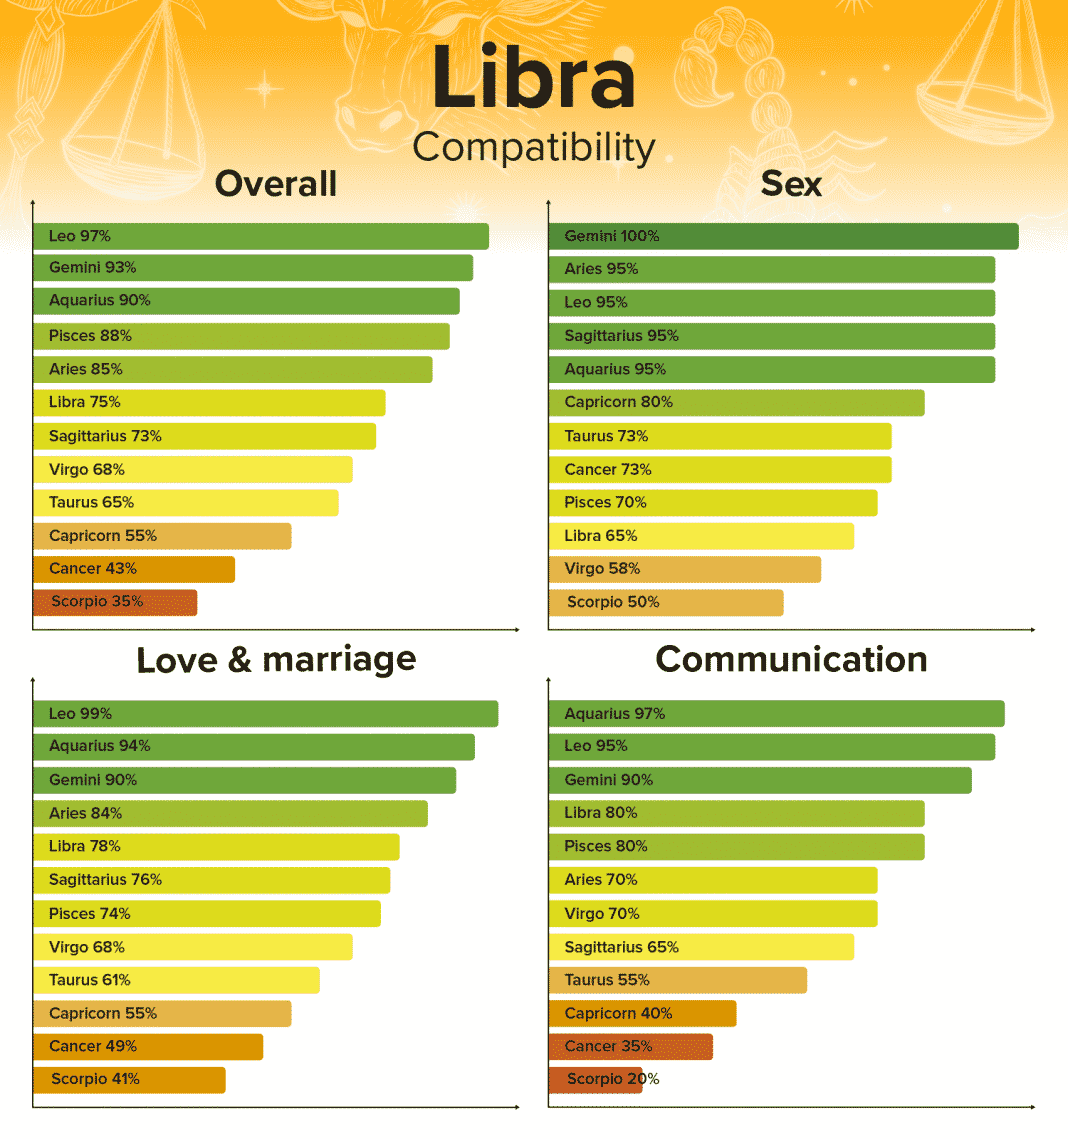 What is a Libra compatible with?